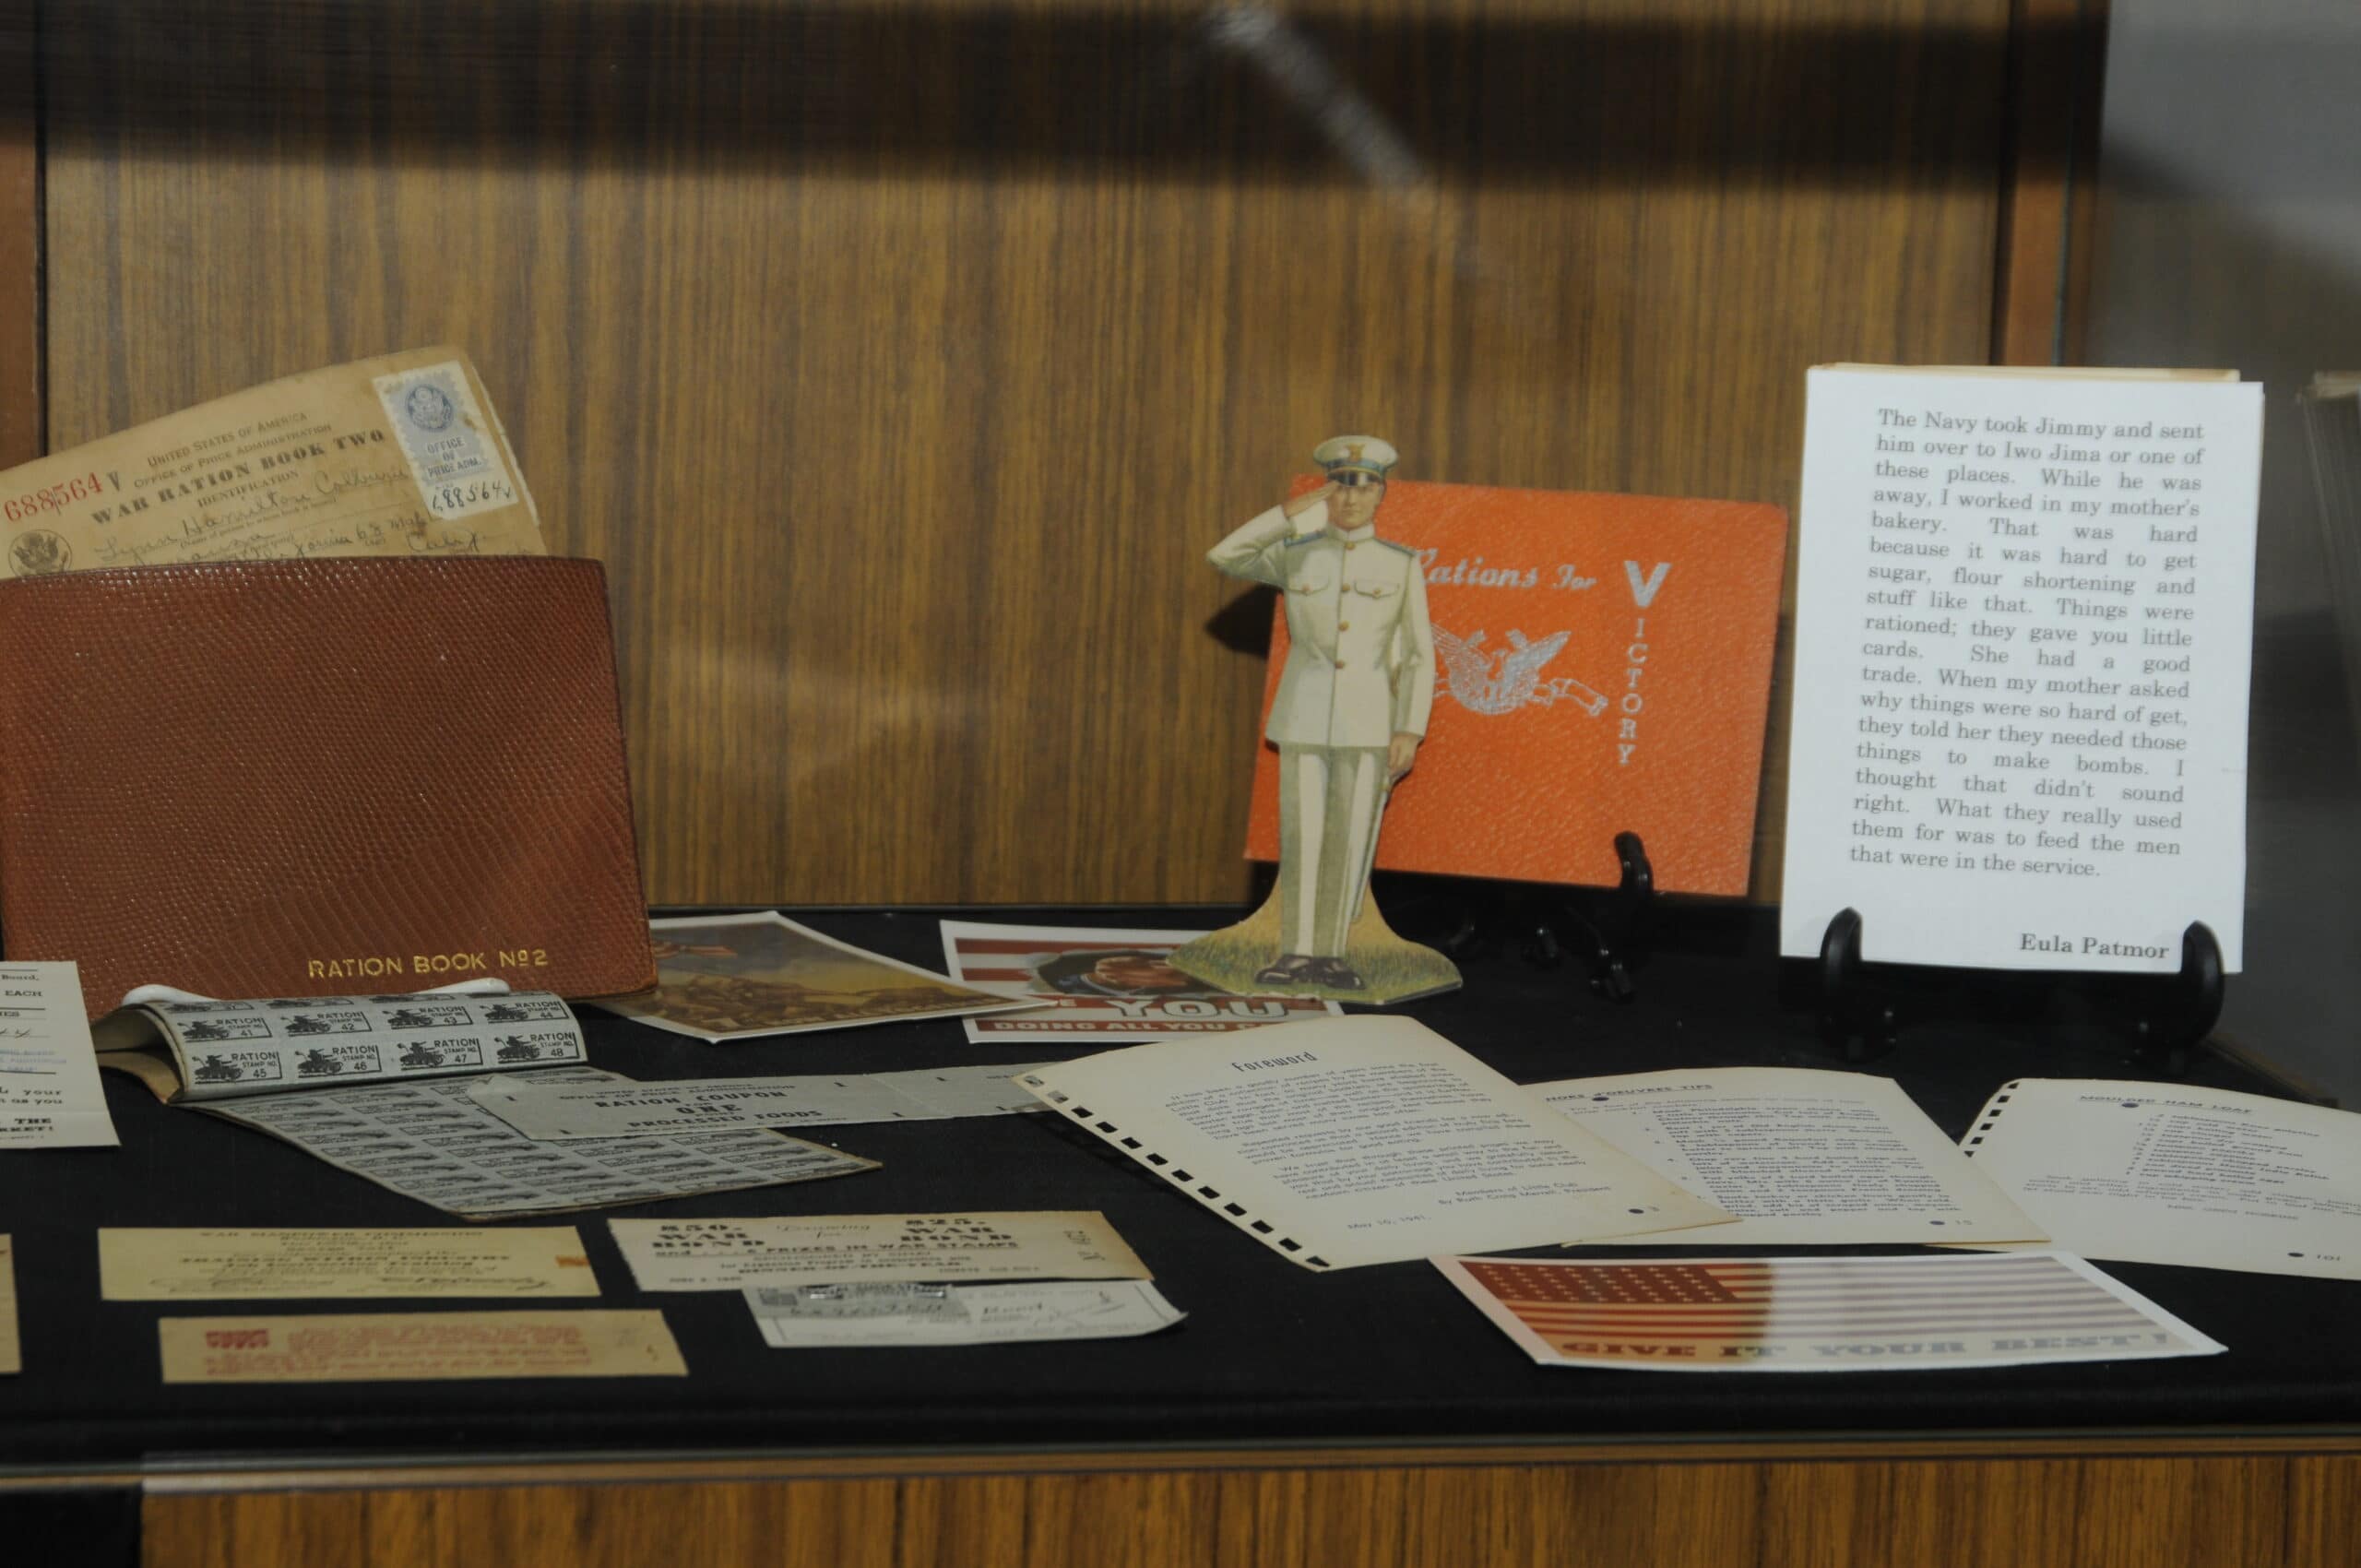 Pearl harbor journals and papers from opening reception